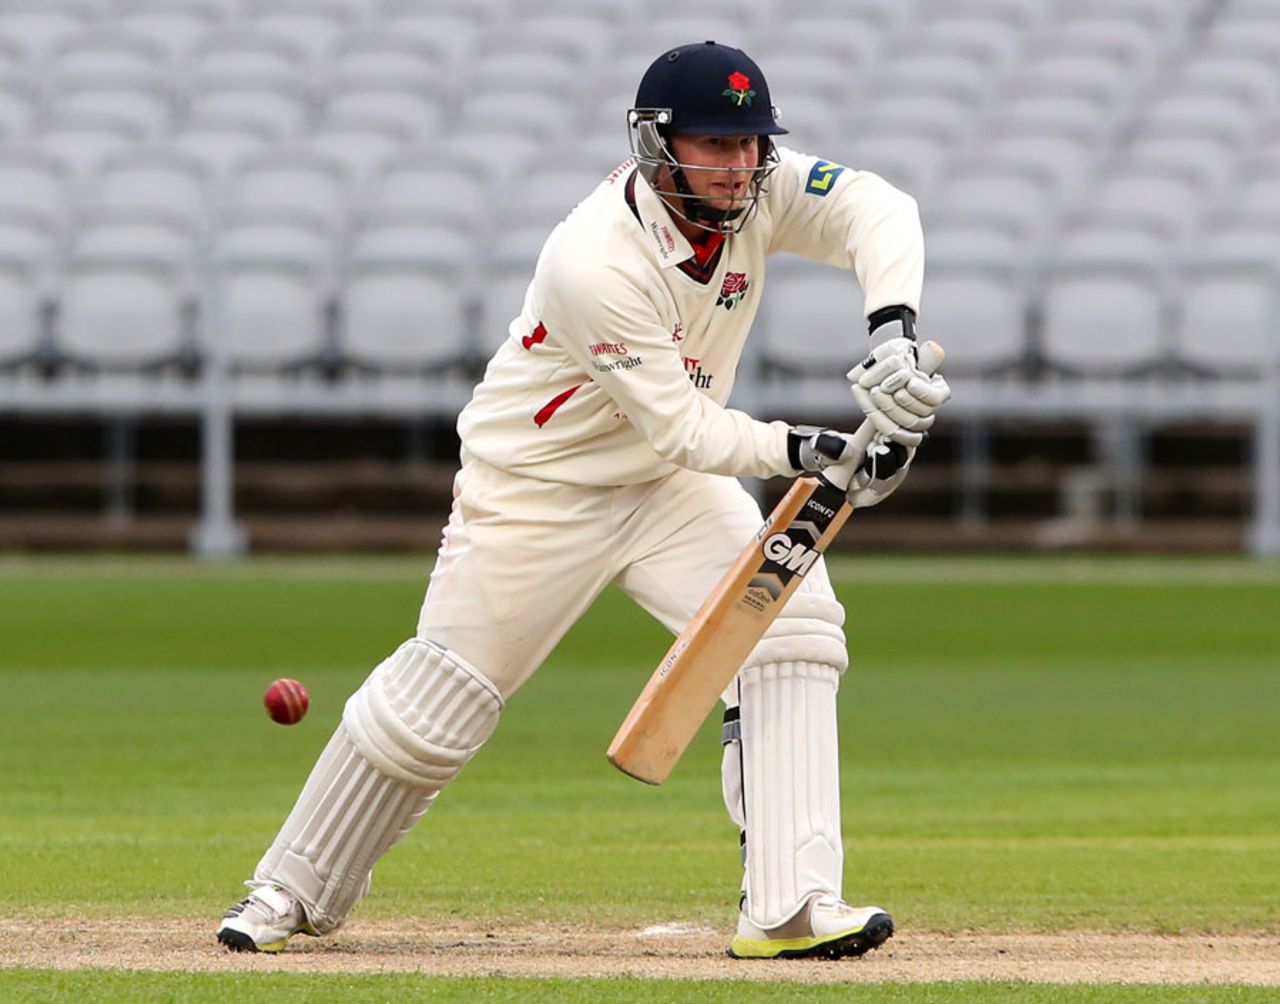 Karl Brown presses forward in defence, Lancashire v Kent, County Championship, Division Two, Old Trafford, 2nd day, April 25, 2013